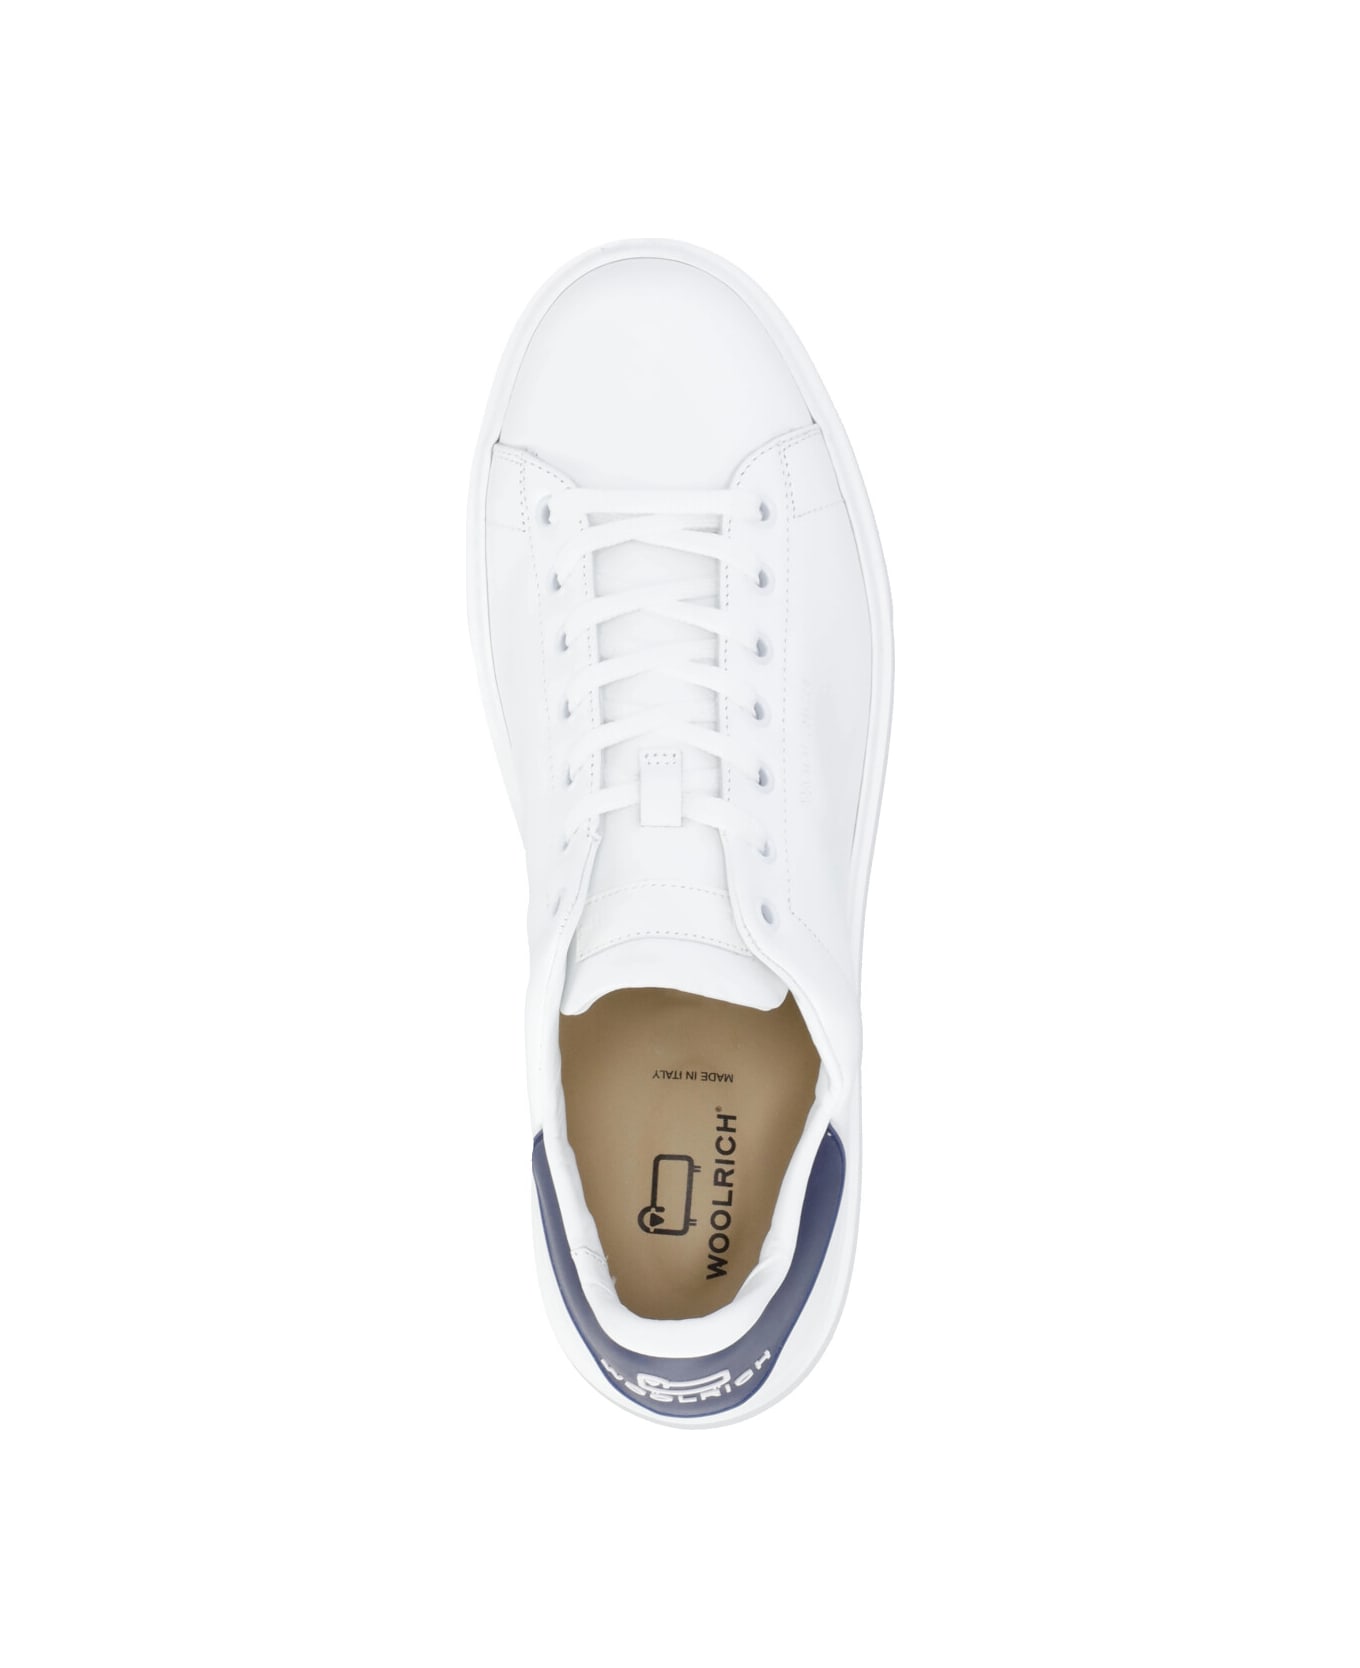 Woolrich Leather Sneakers - Calf White Pvc Blue